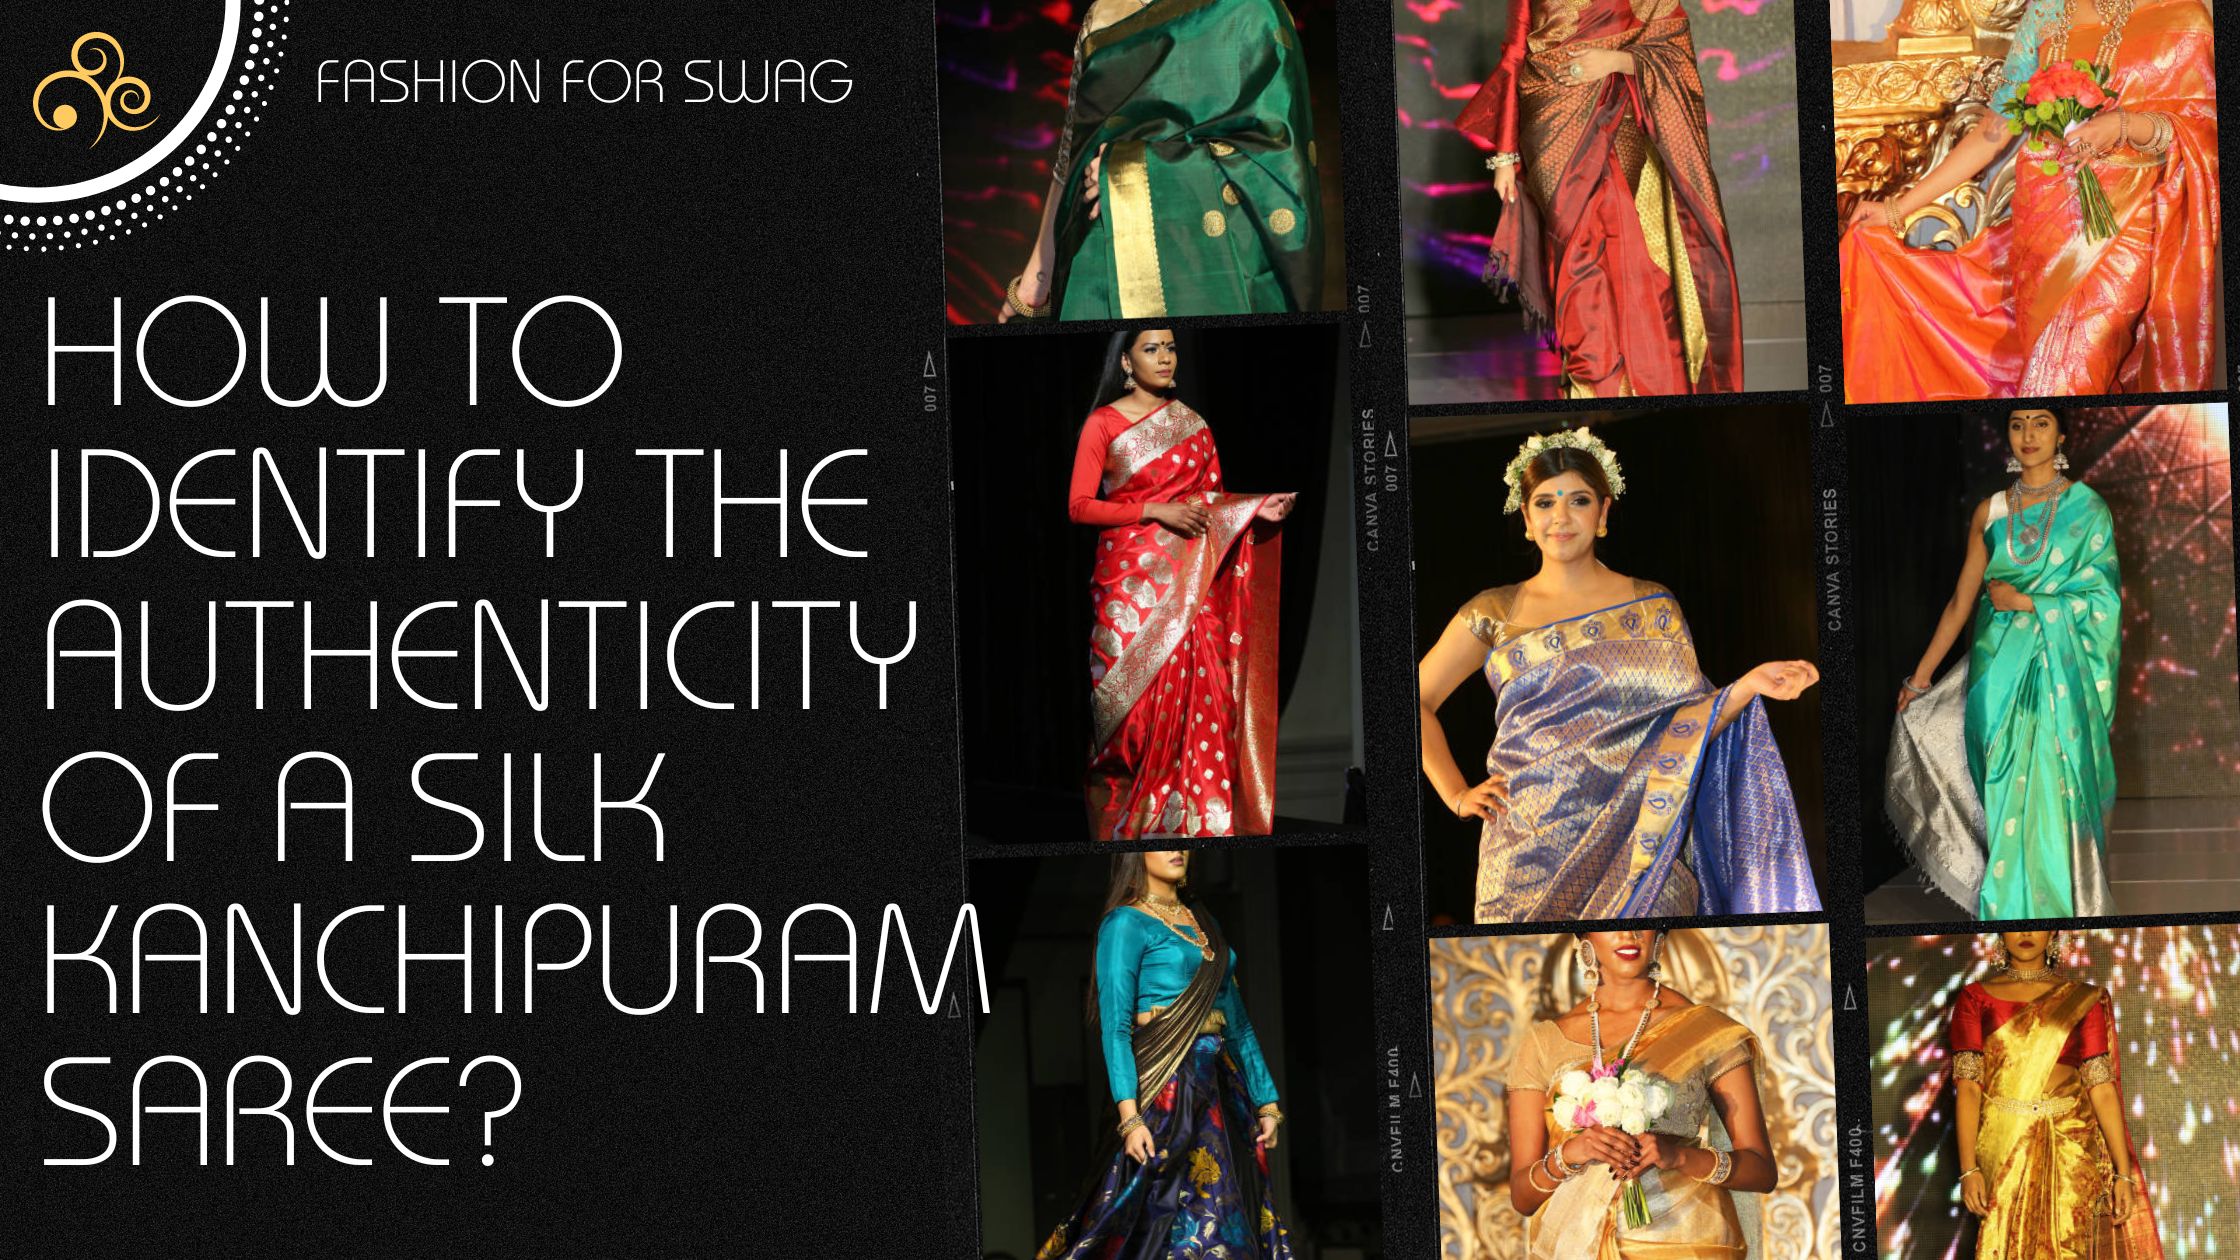 How to Identify the Authenticity of a Silk Kanchipuram Saree?